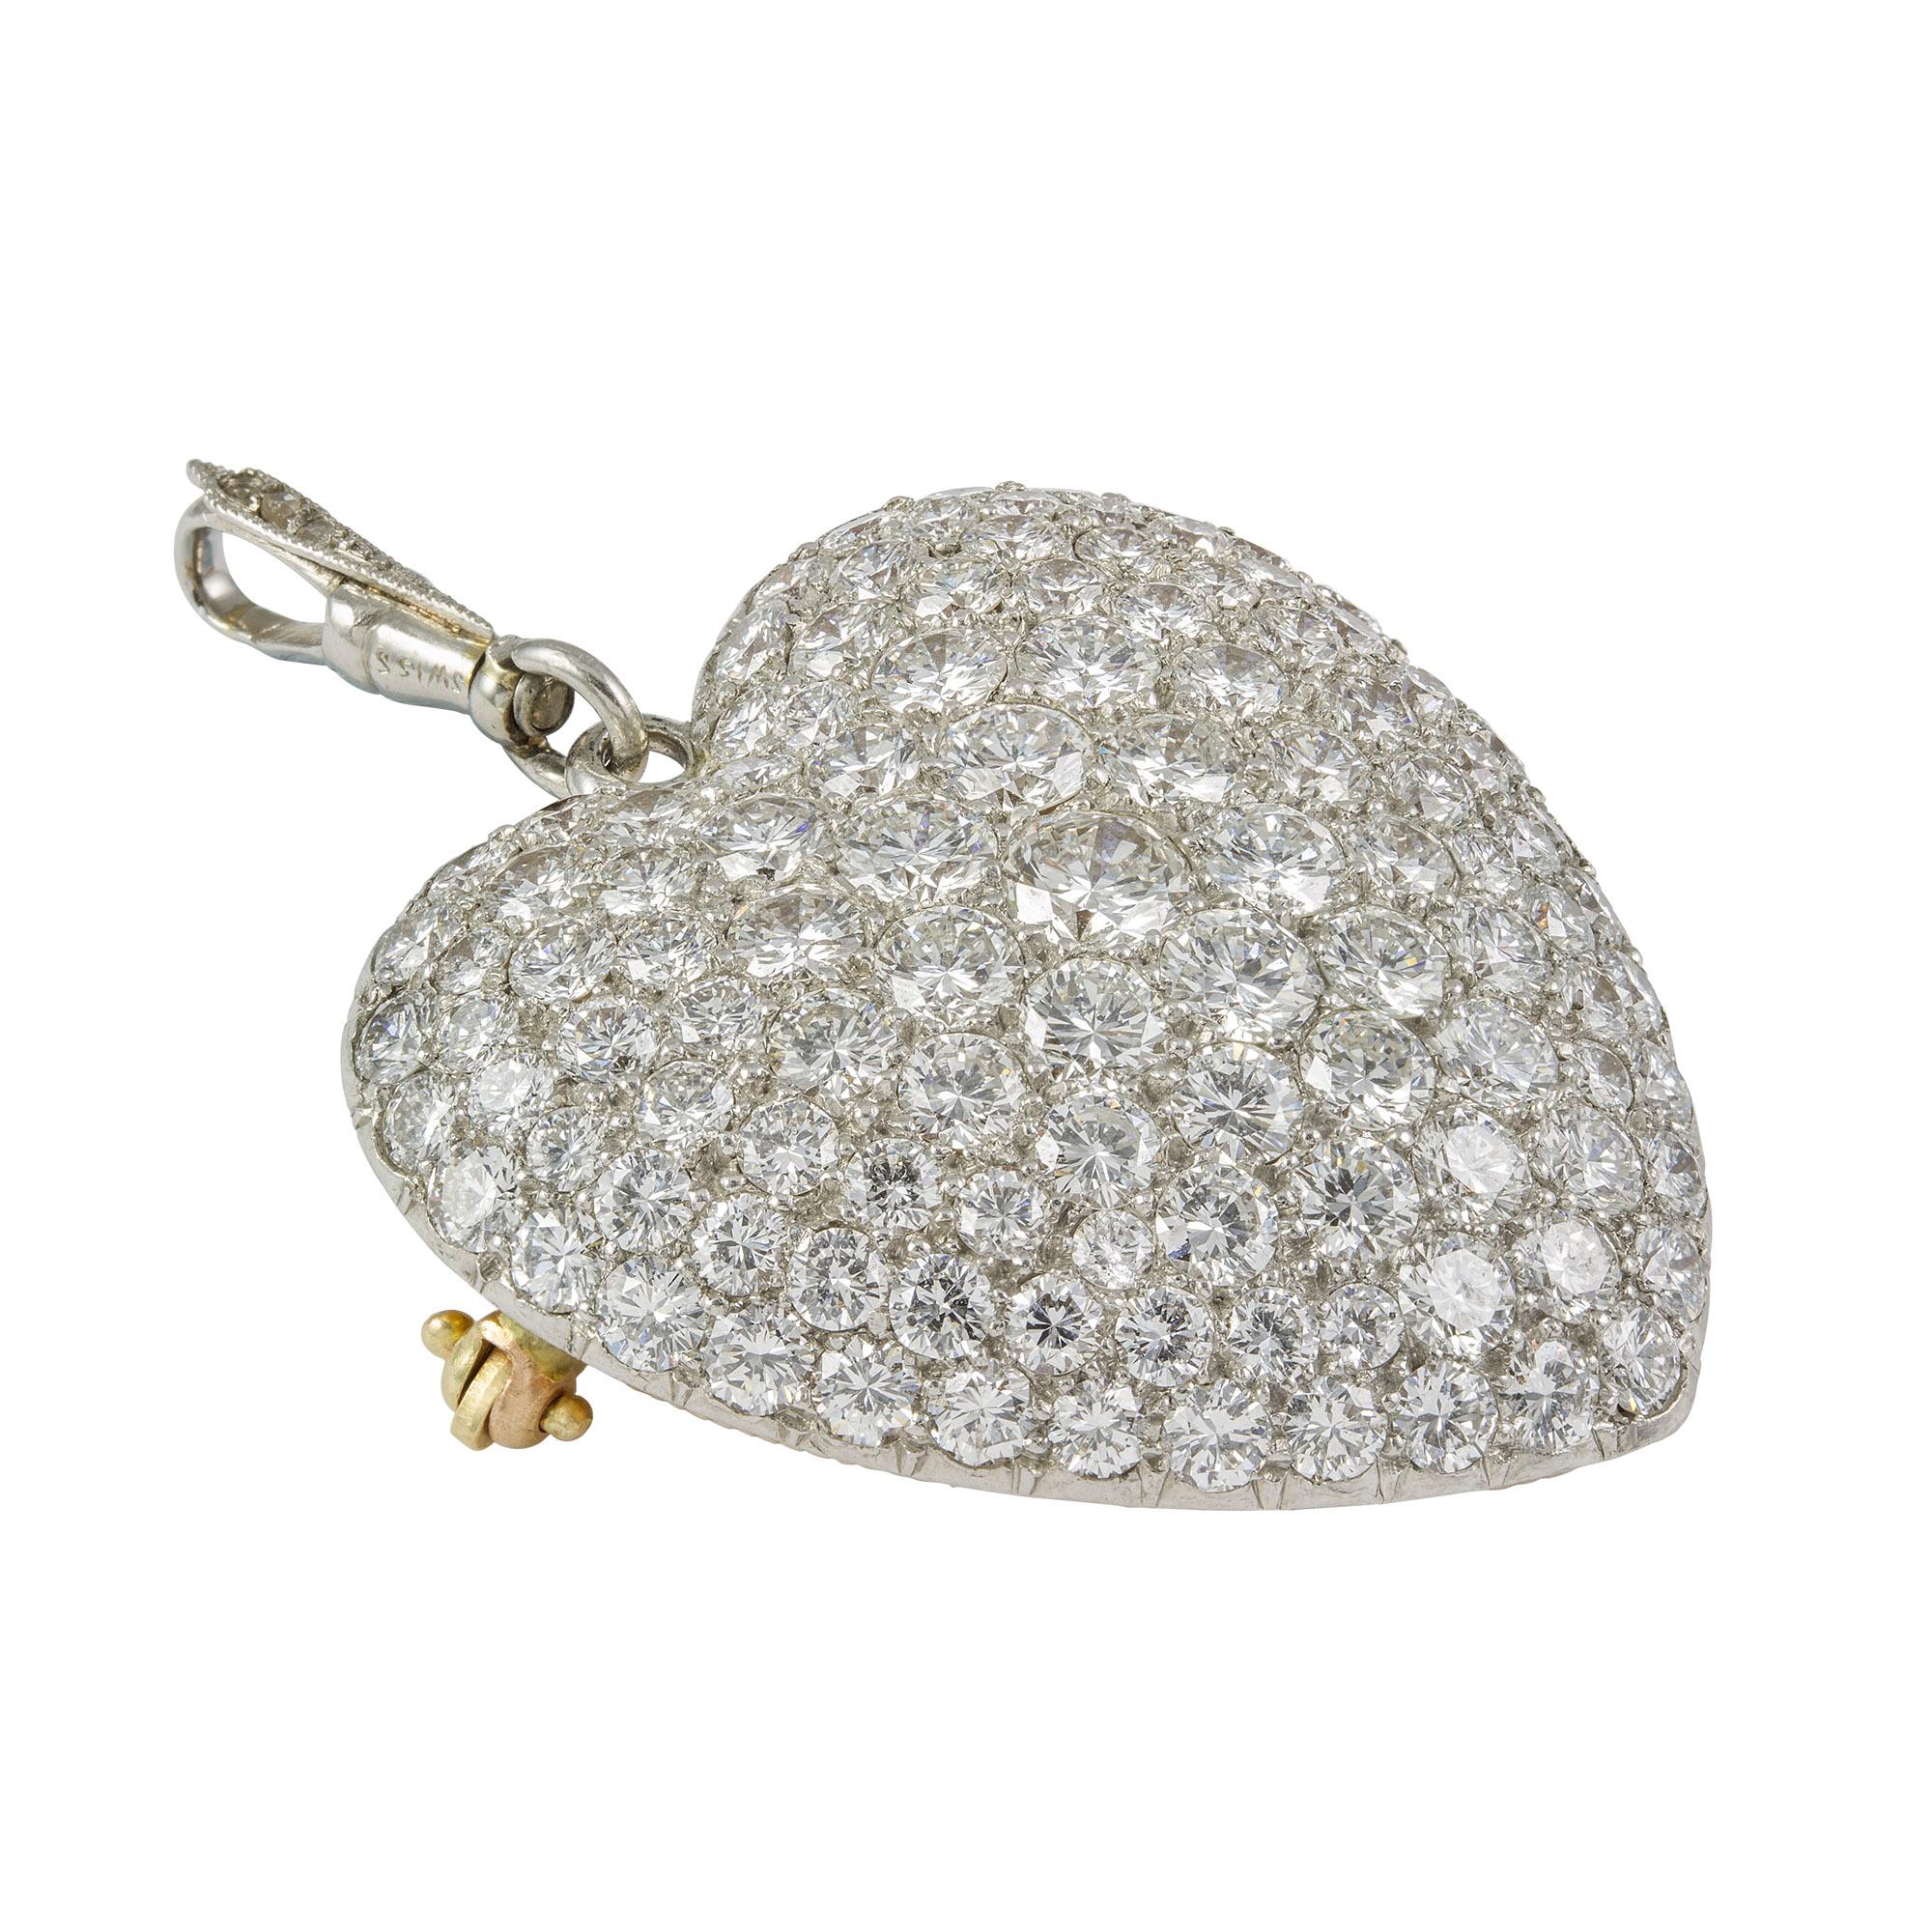 A diamond set heart brooch/pendant, pave set with round brilliant-cut diamonds, estimated to weigh 6.5 carats in total, all in white mount with heart shape glass locket compartment on reverse, within a fluted gold frame with a diamond set diamond